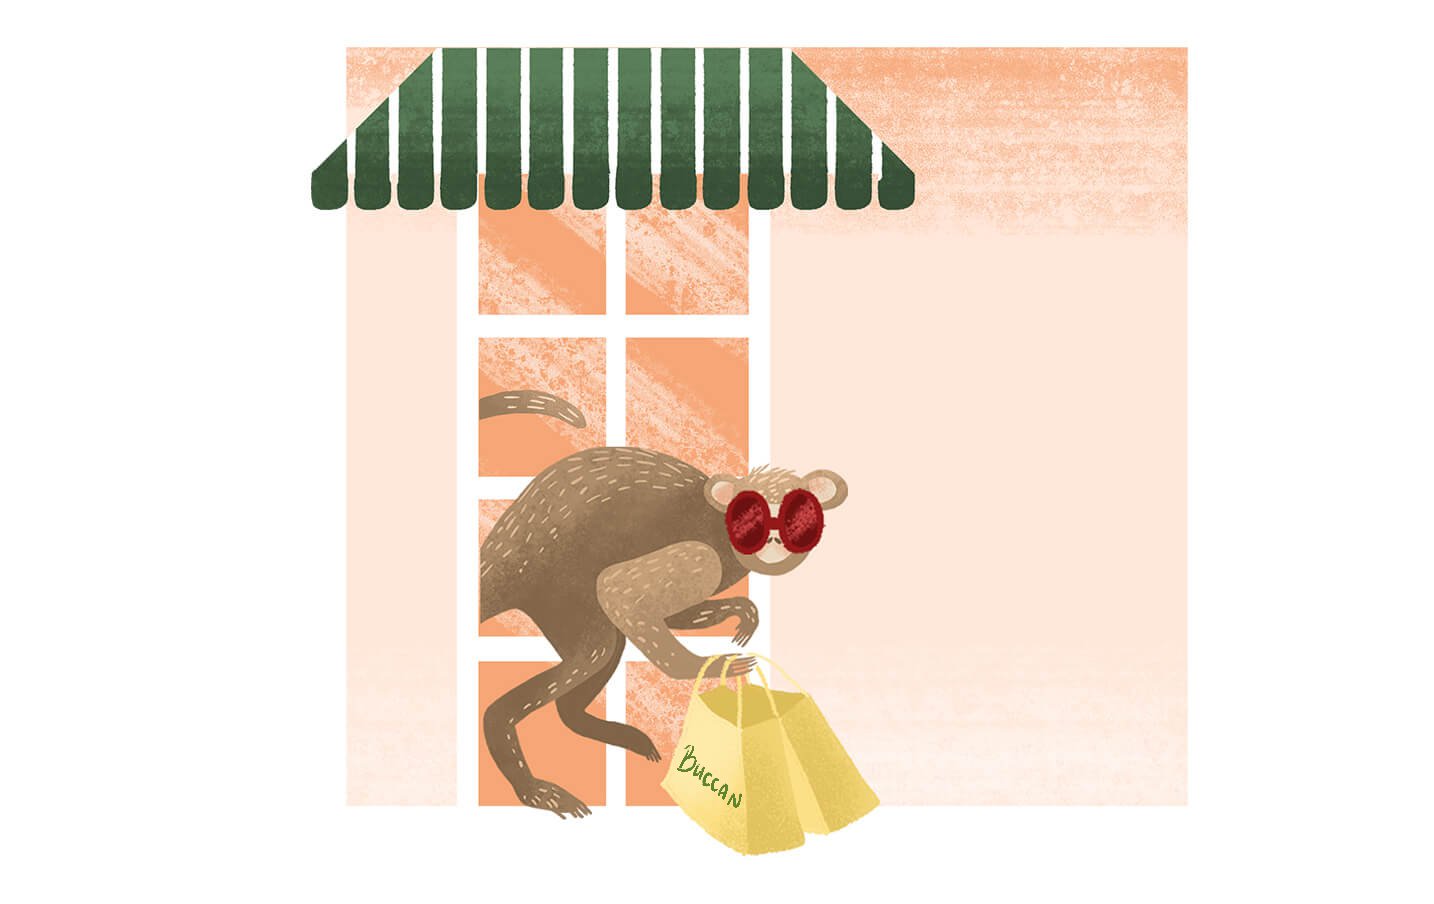 Illustration of a monkey jumping out of the window holding a bag of Buccan food from Palm Beach